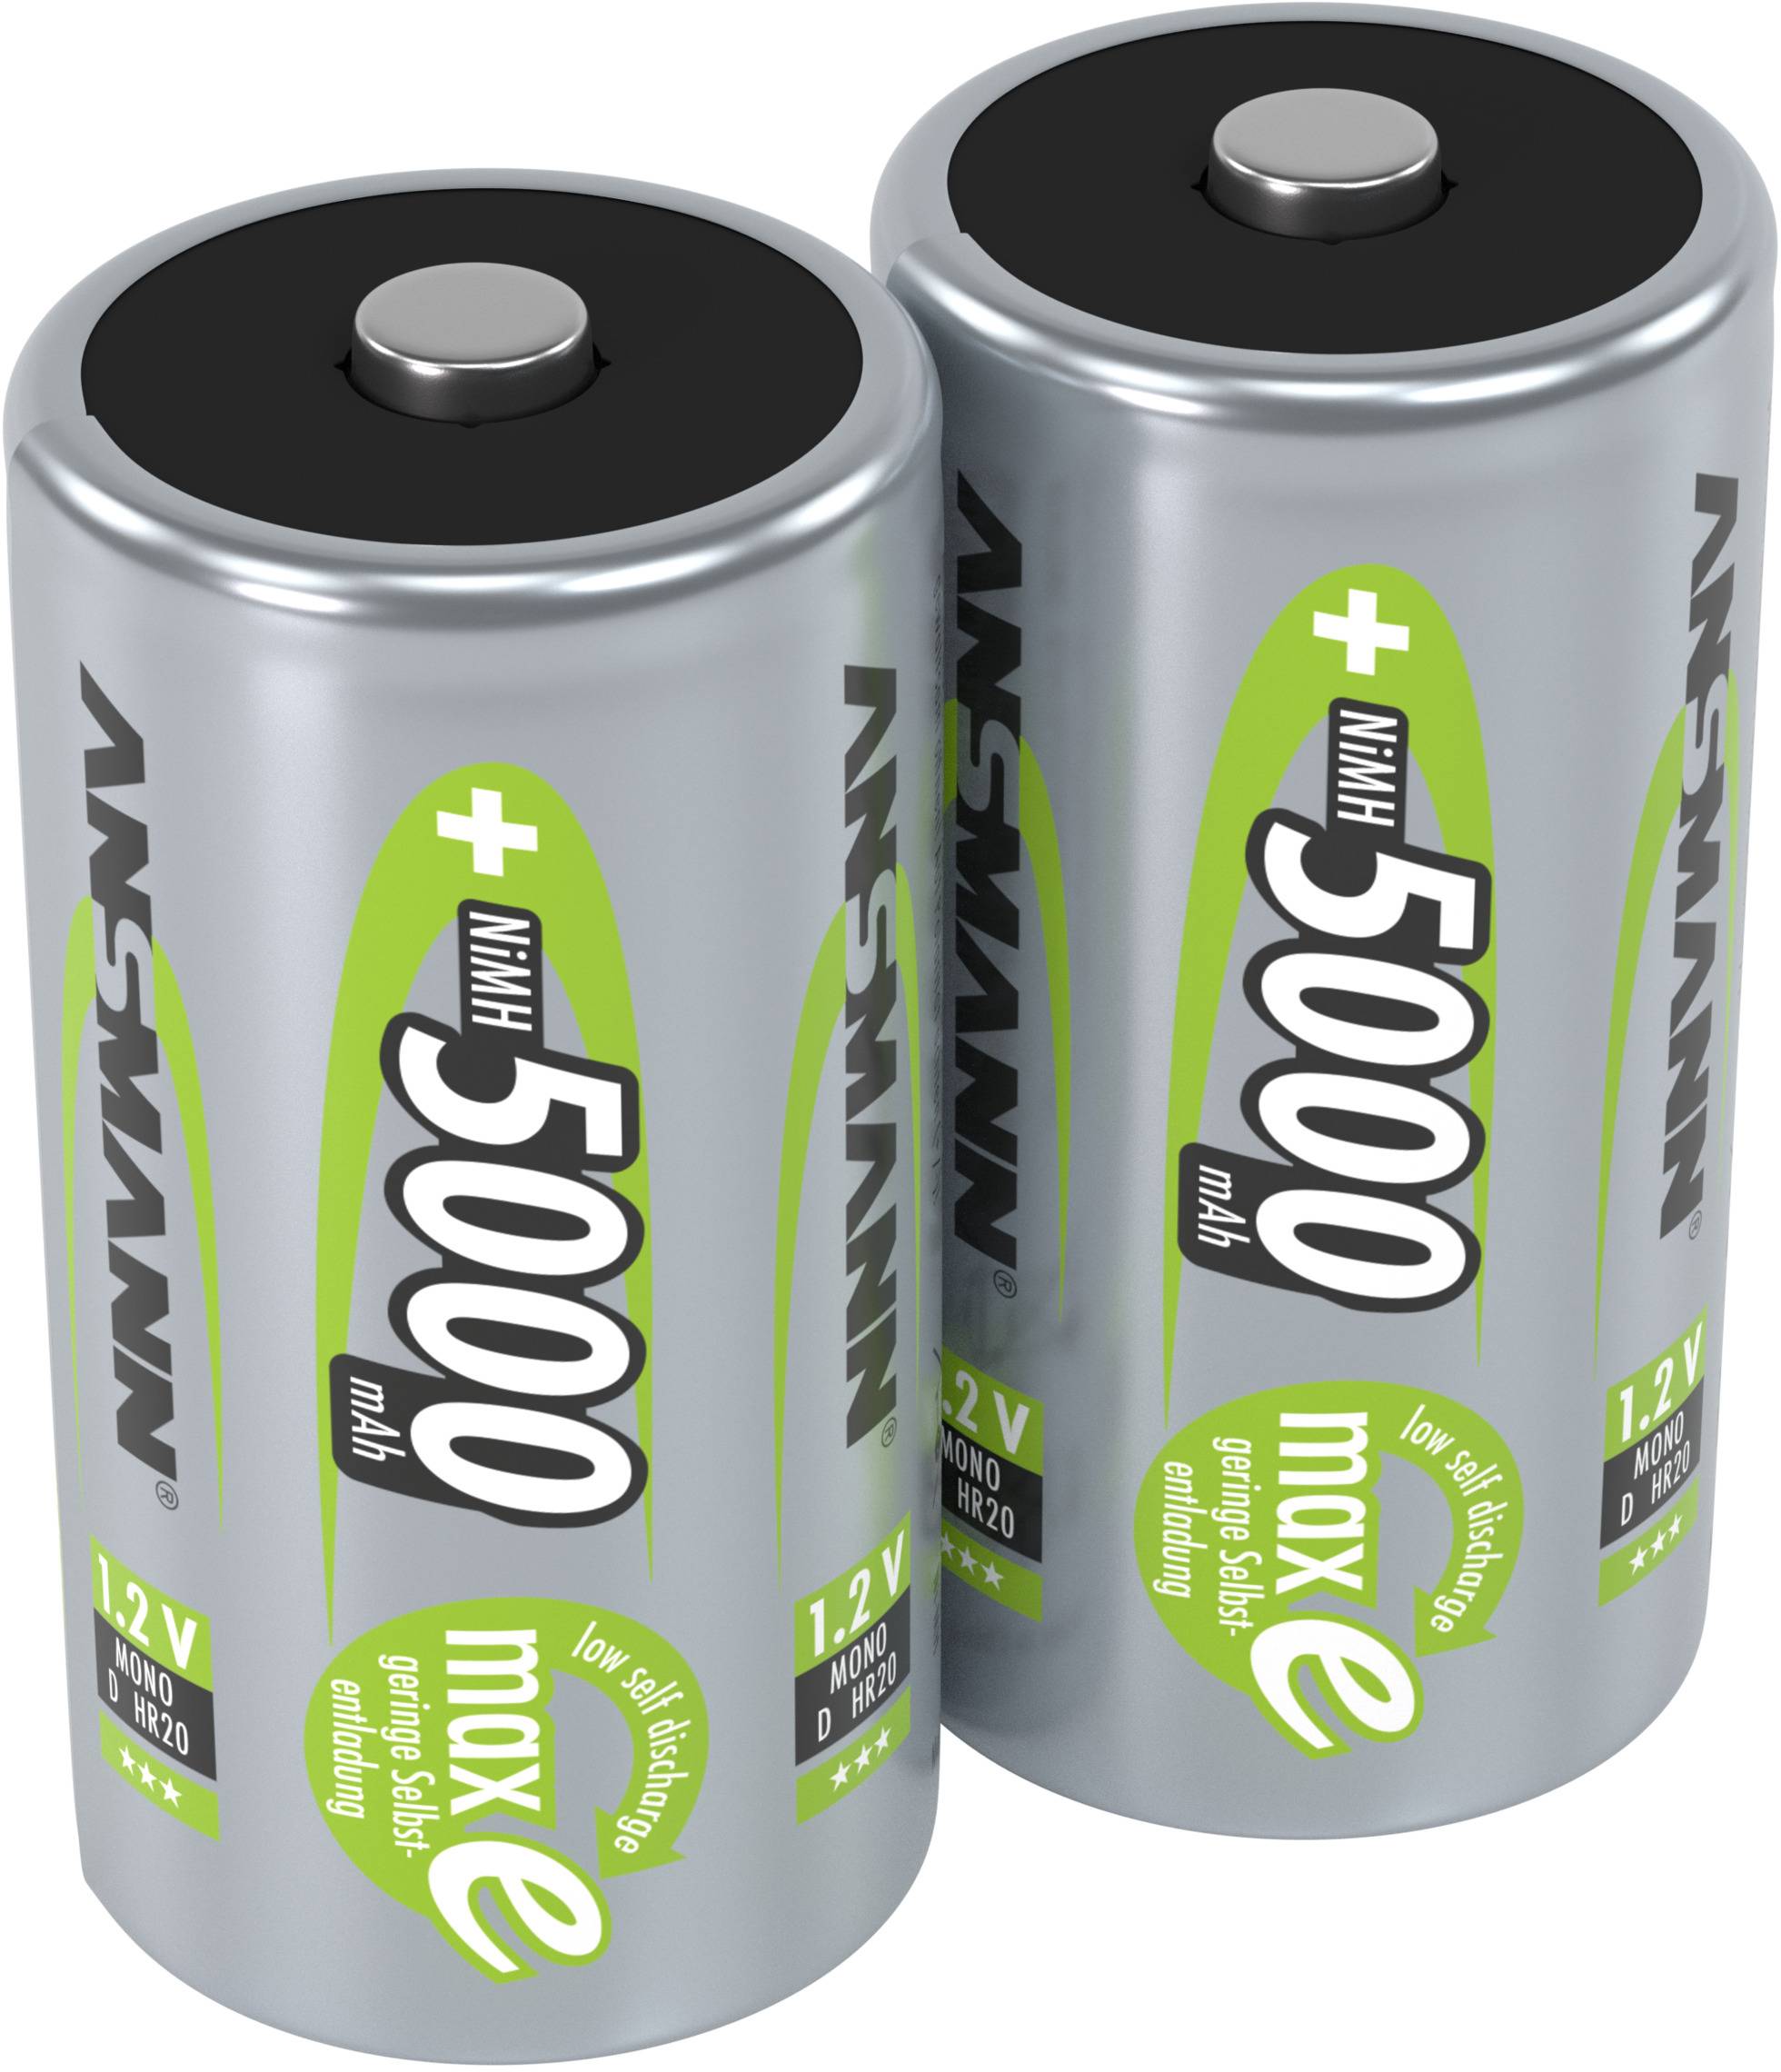 accus-rechargeable-lr20-12v-10000mah